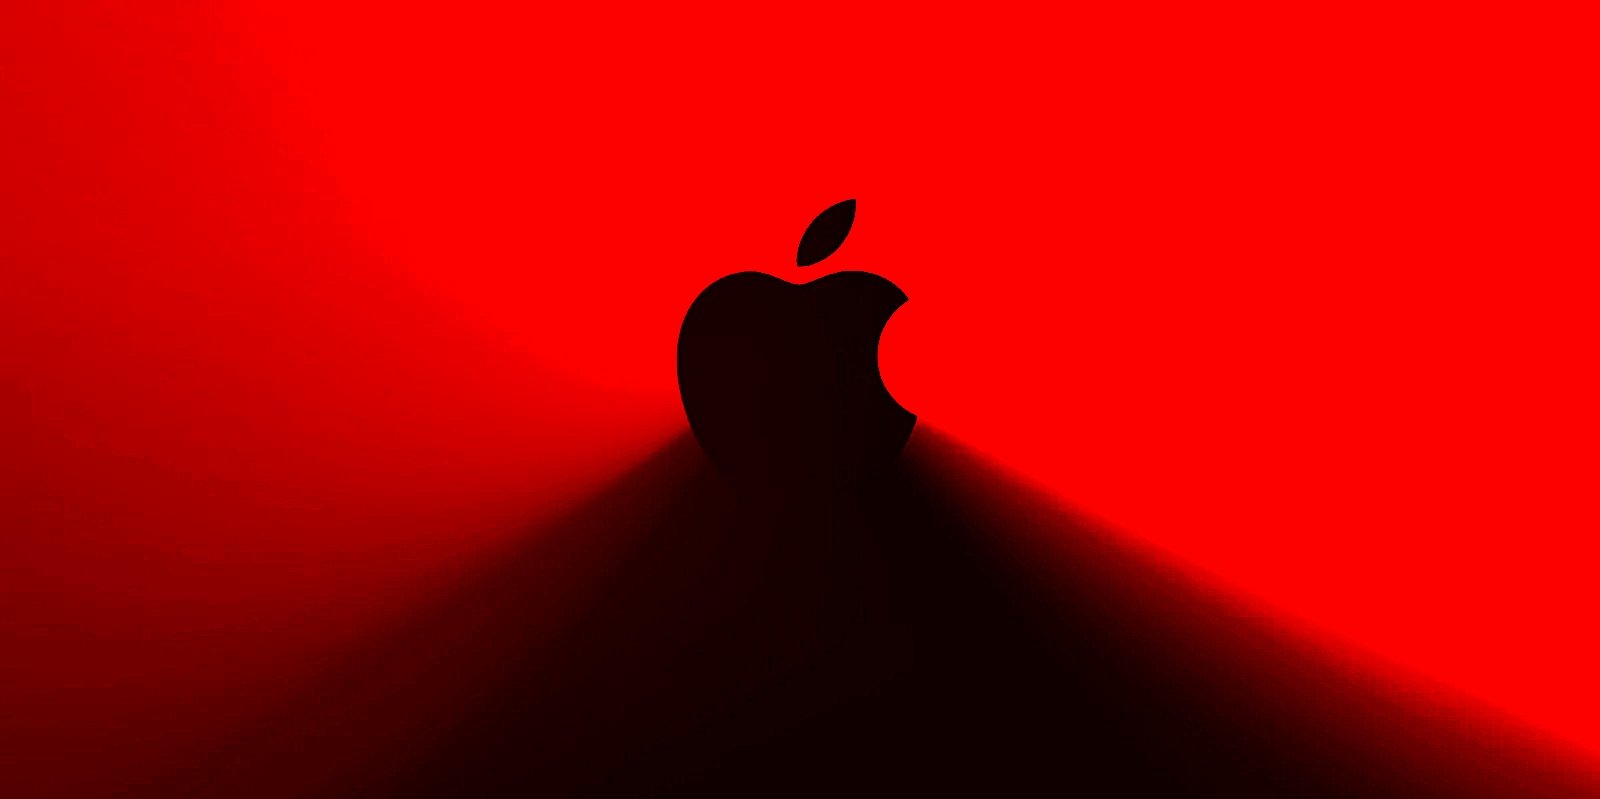 New AdLoad malware variant slips through Apple's XProtect defenses